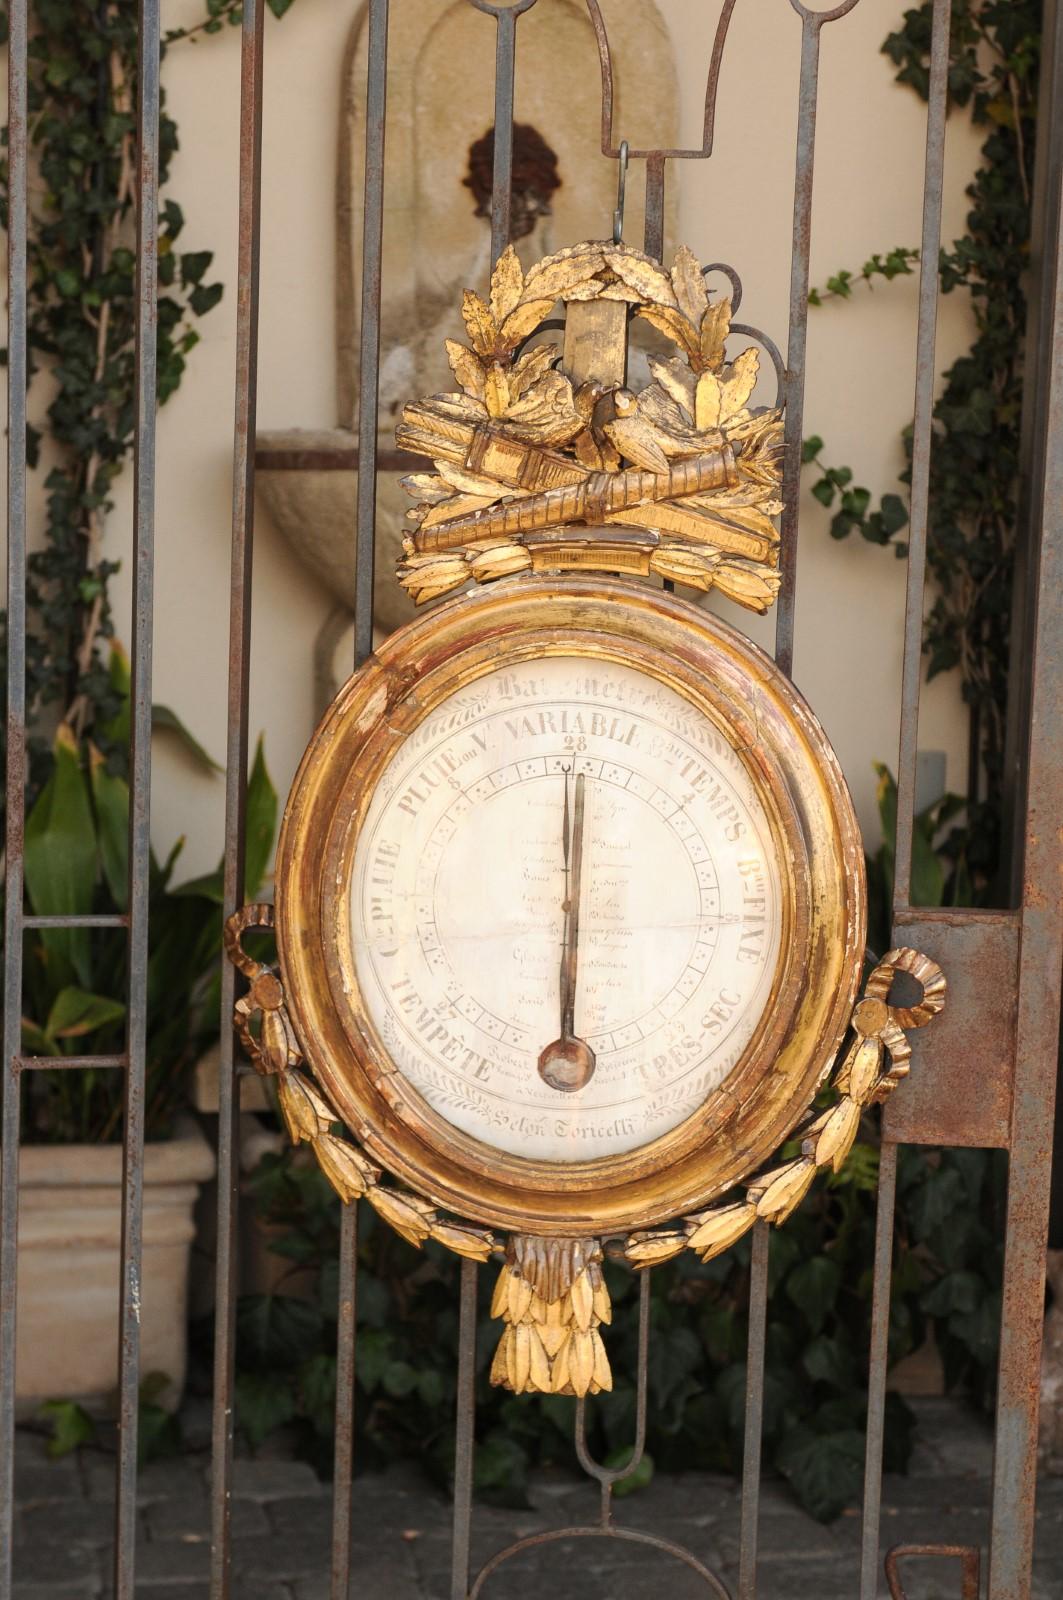 A French Louis XVI period giltwood barometer from the late 18th century, with hand carved hunting trophy and ribbon-tied garland. Born in France during the troubled period of Louis XVI last reigning years, this exquisite barometer 'Selon Toricelli'